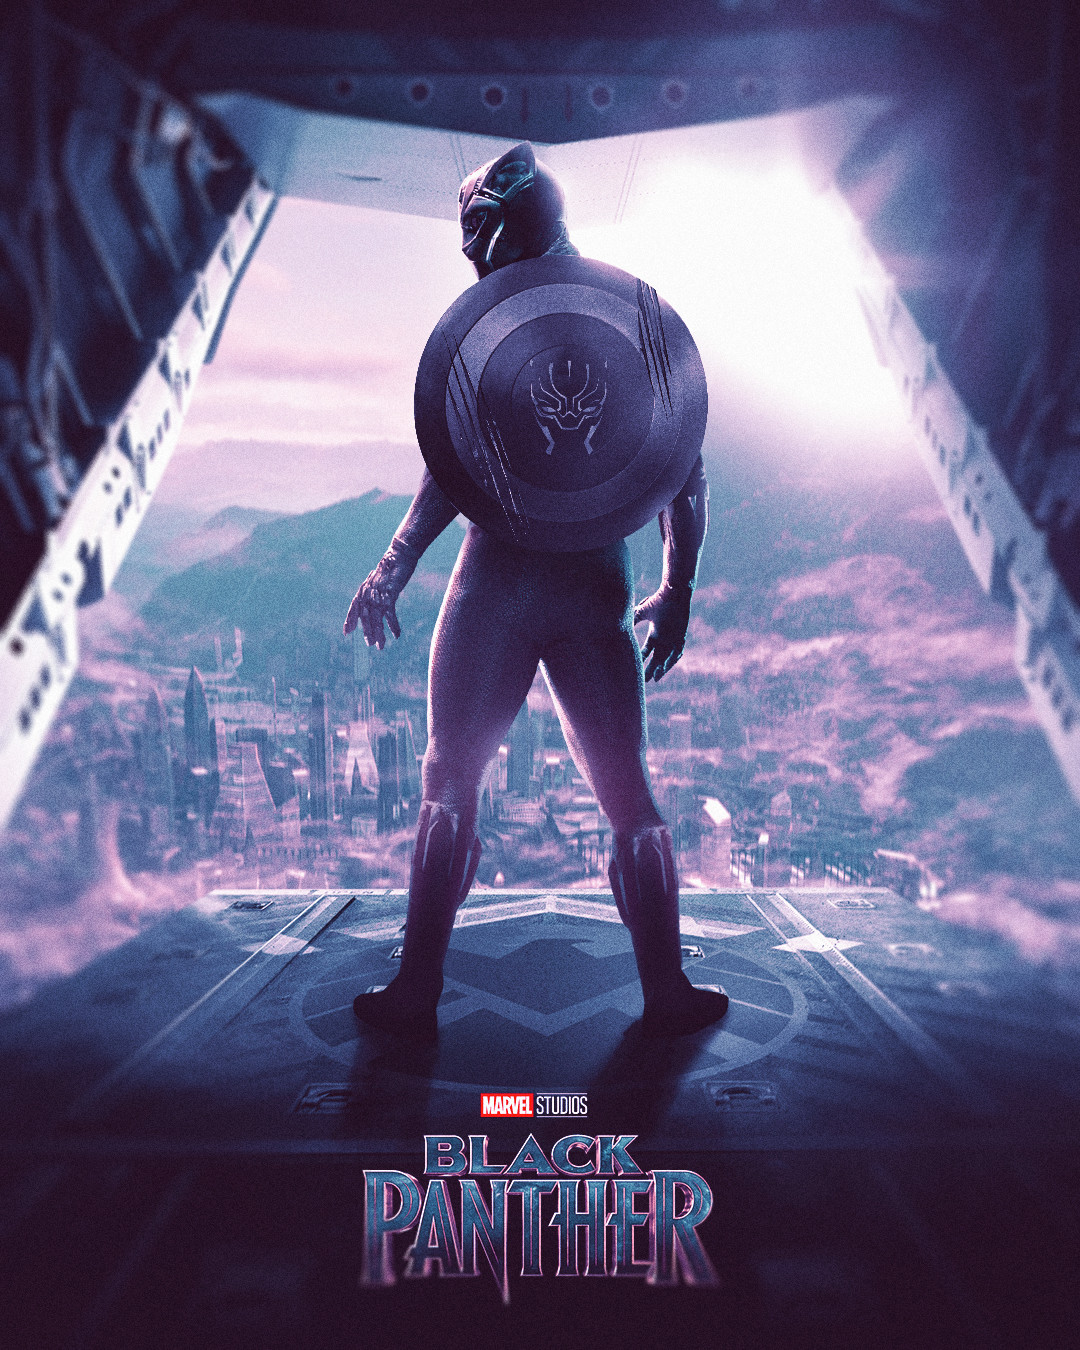 Remade one of the Captain America Winter Solider posters using the Black Panther instead 